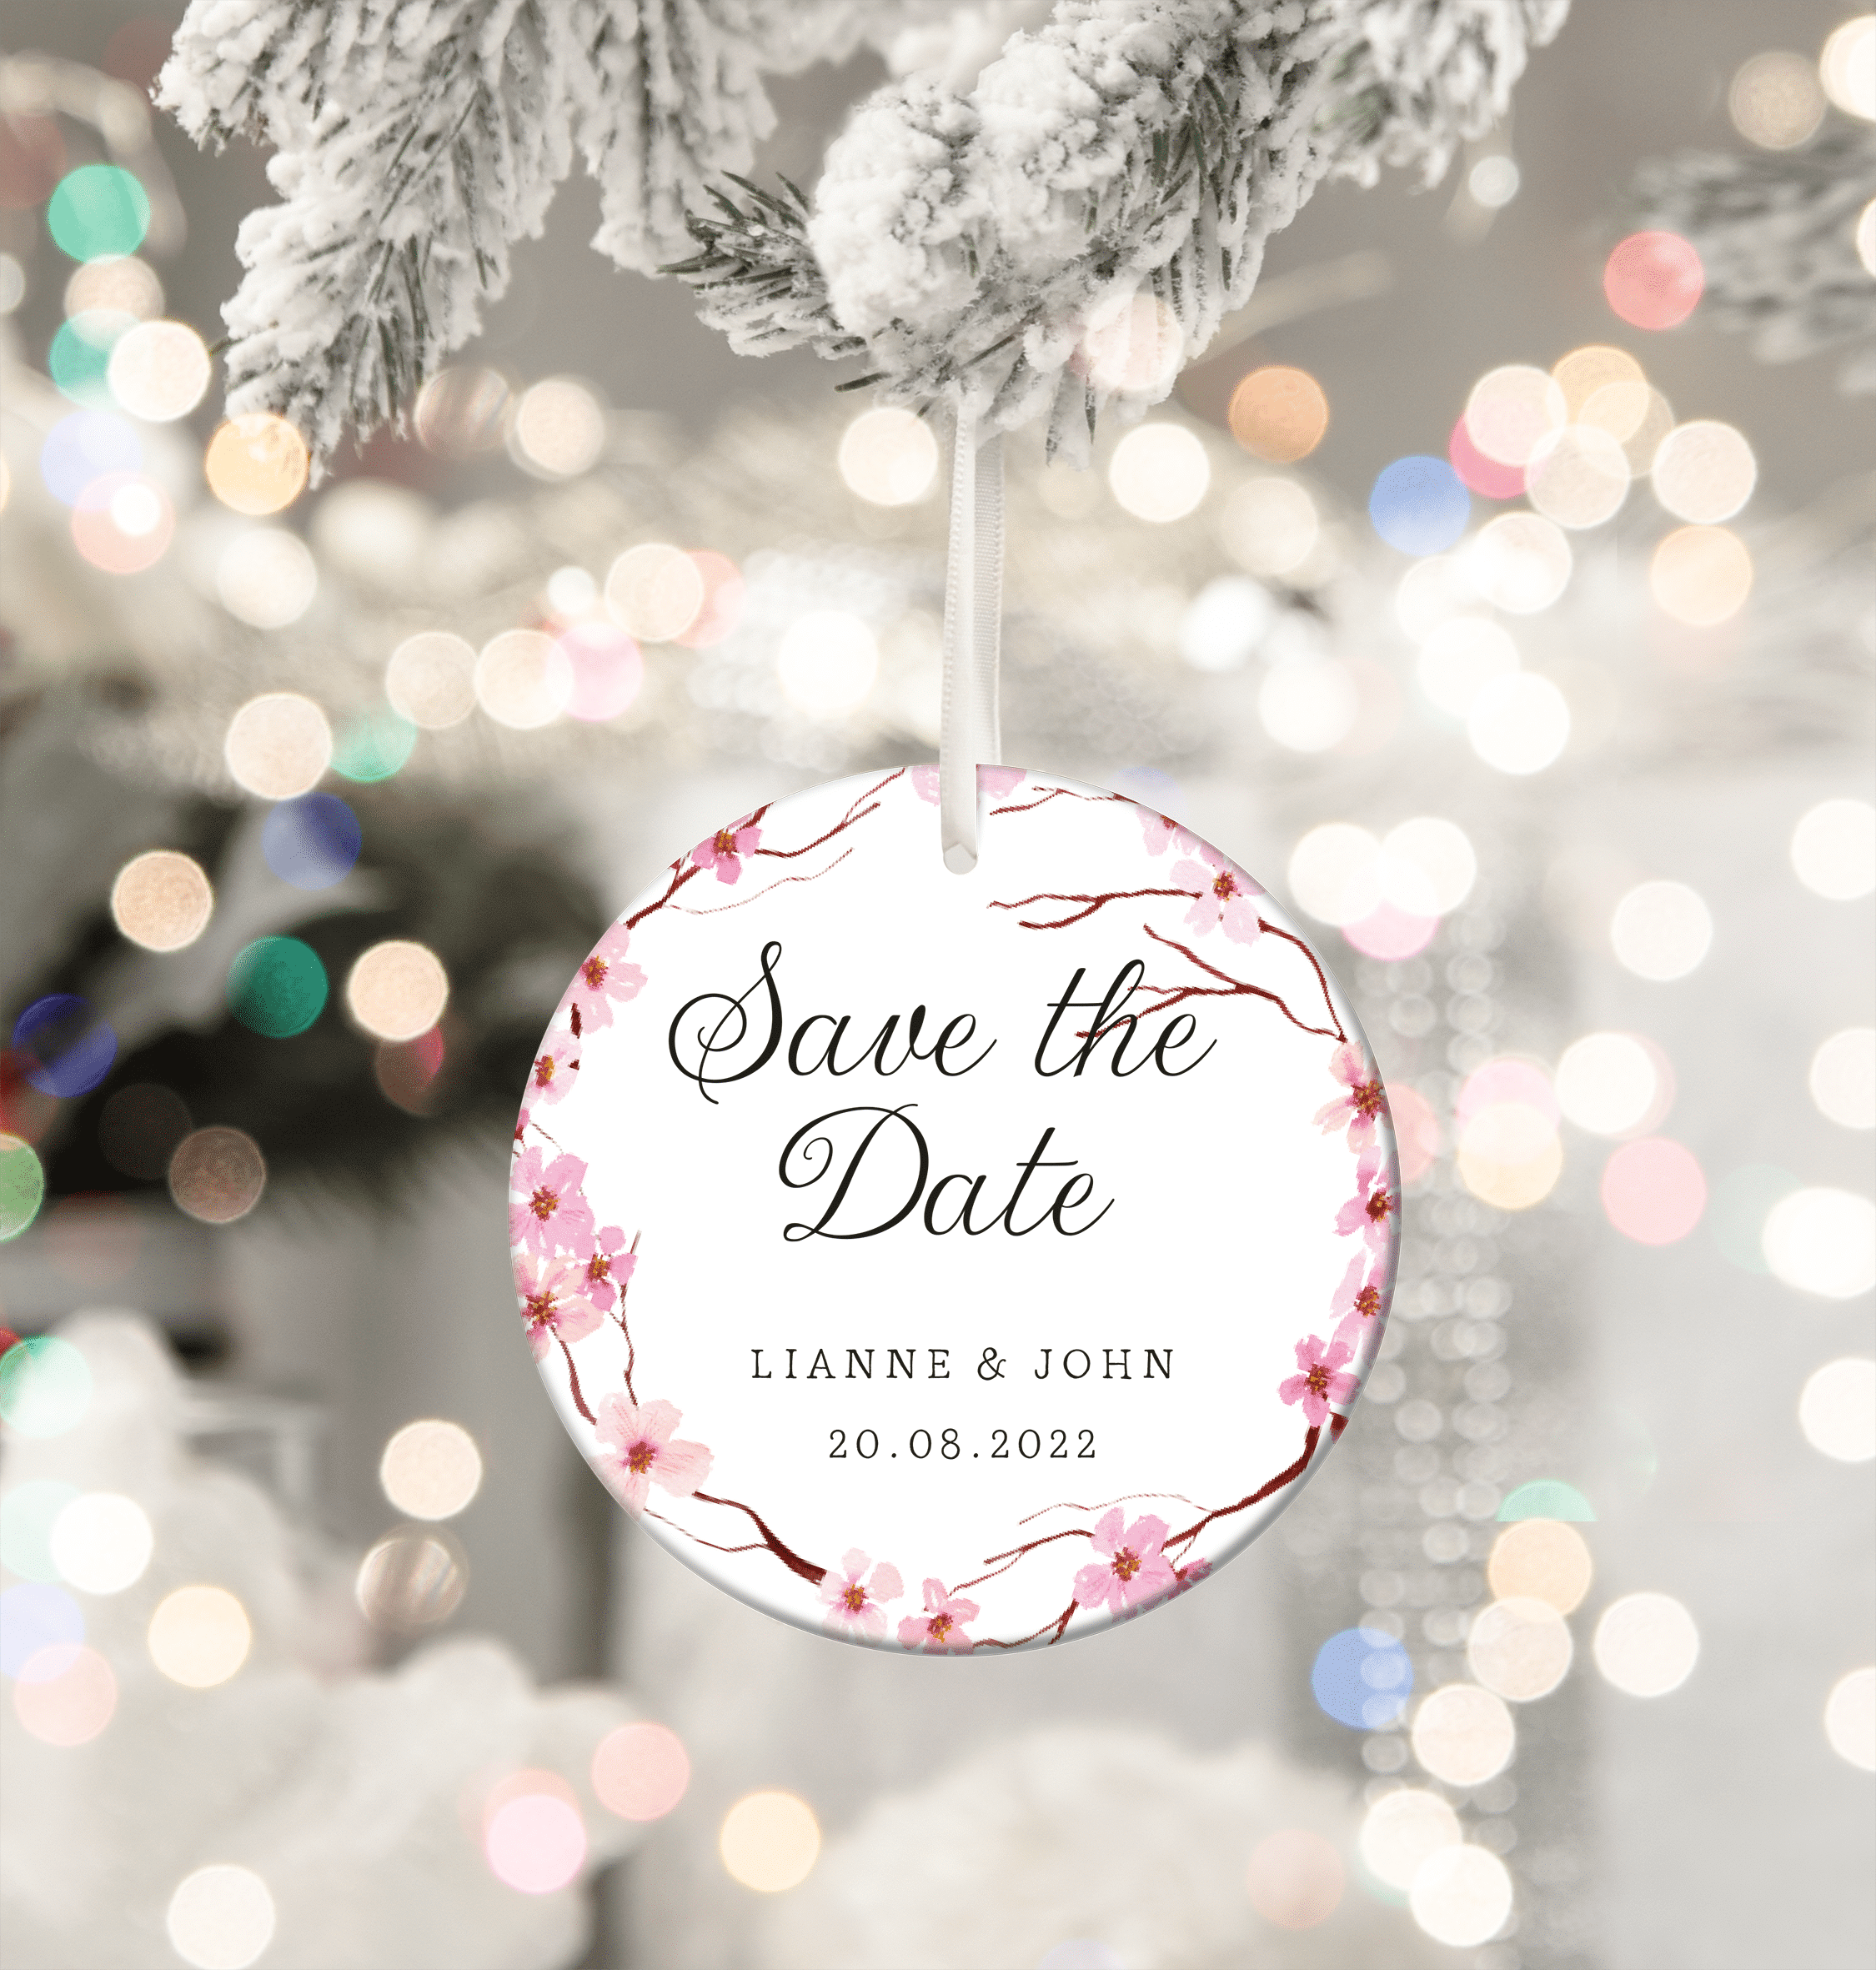 100 x Personalised Save The Date Bauble - Cherry Blossom - Mally's Crafts